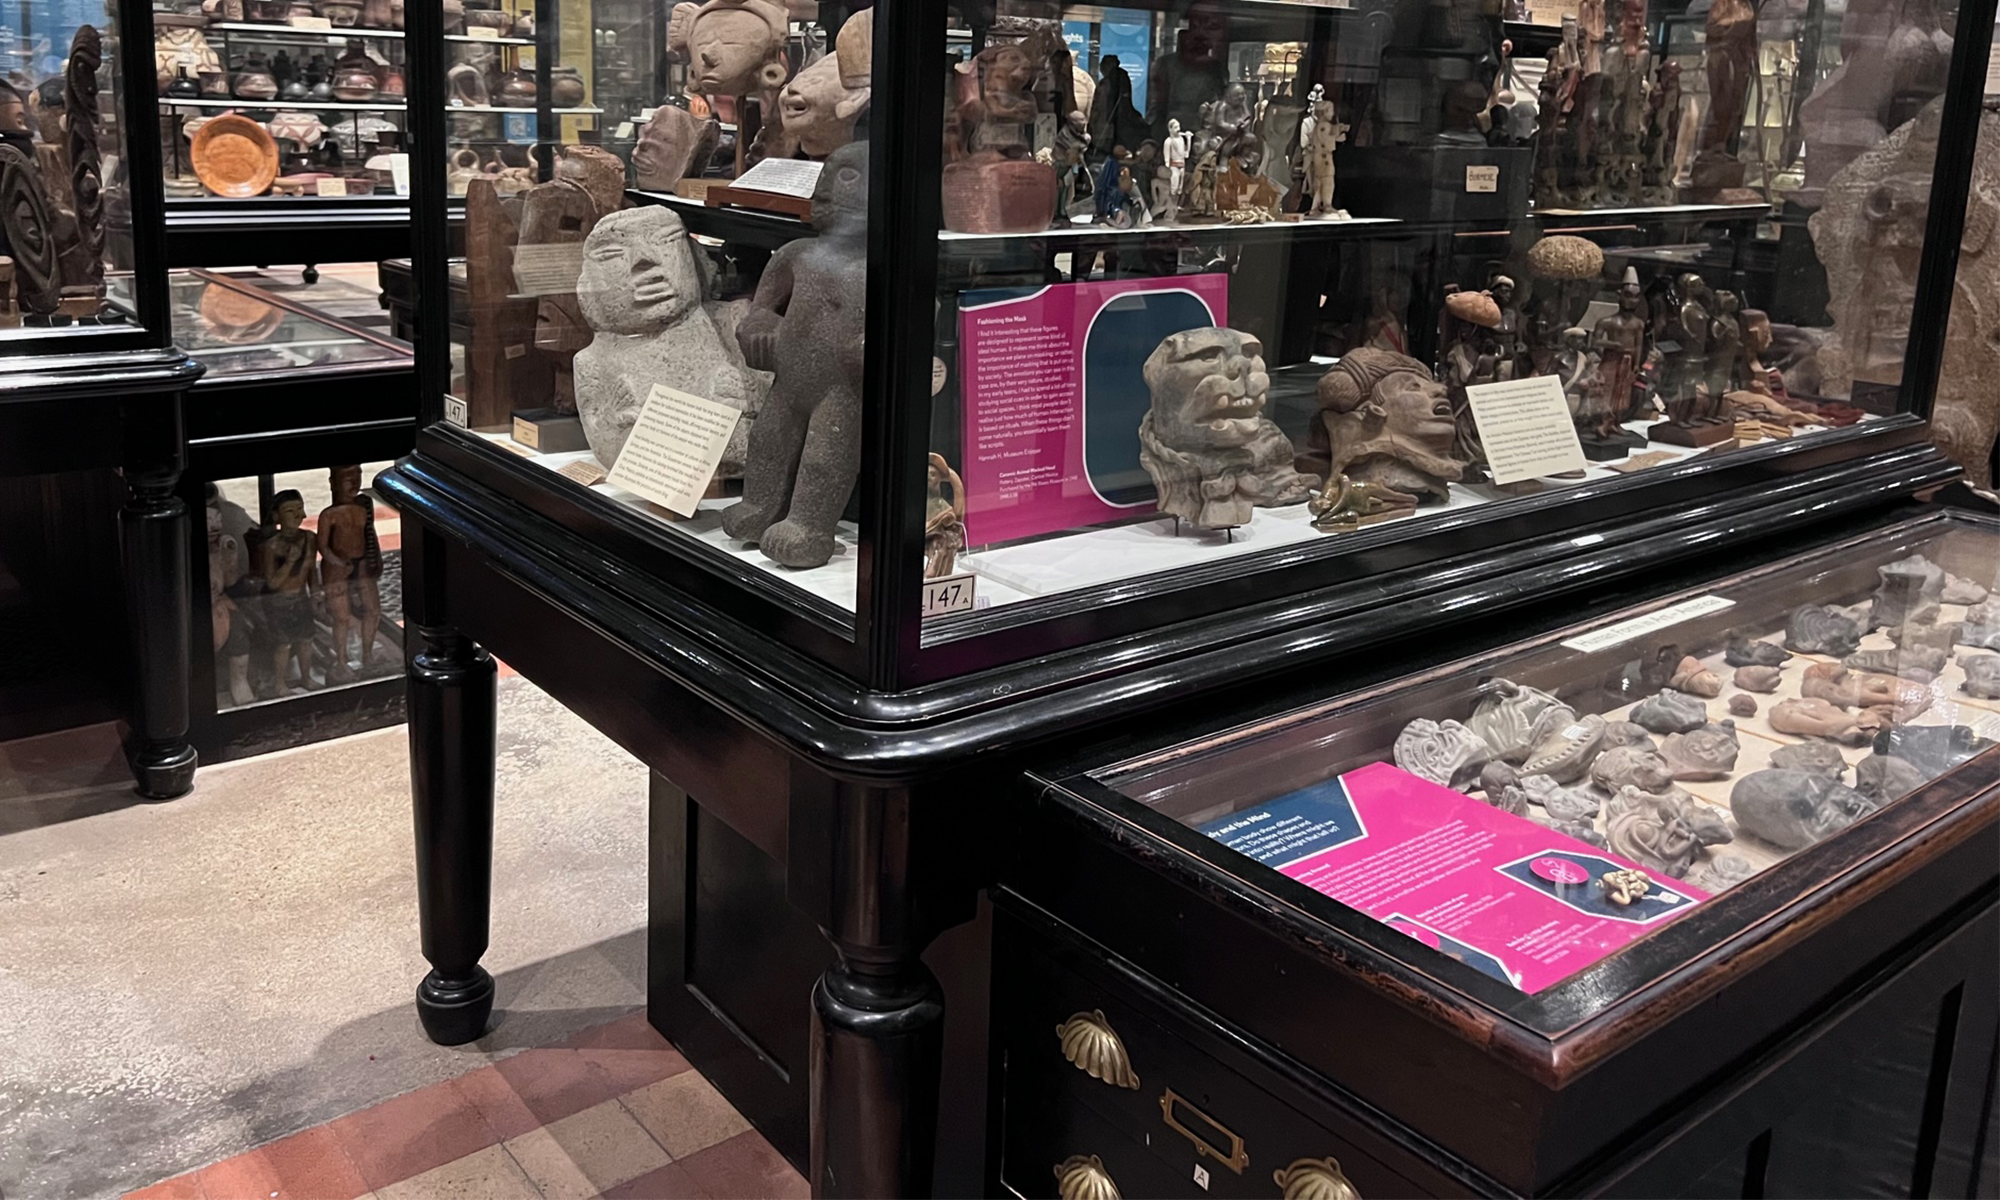 View of museum display cases densely packed with objects with two bright pink graphic panels visible in the displays. 